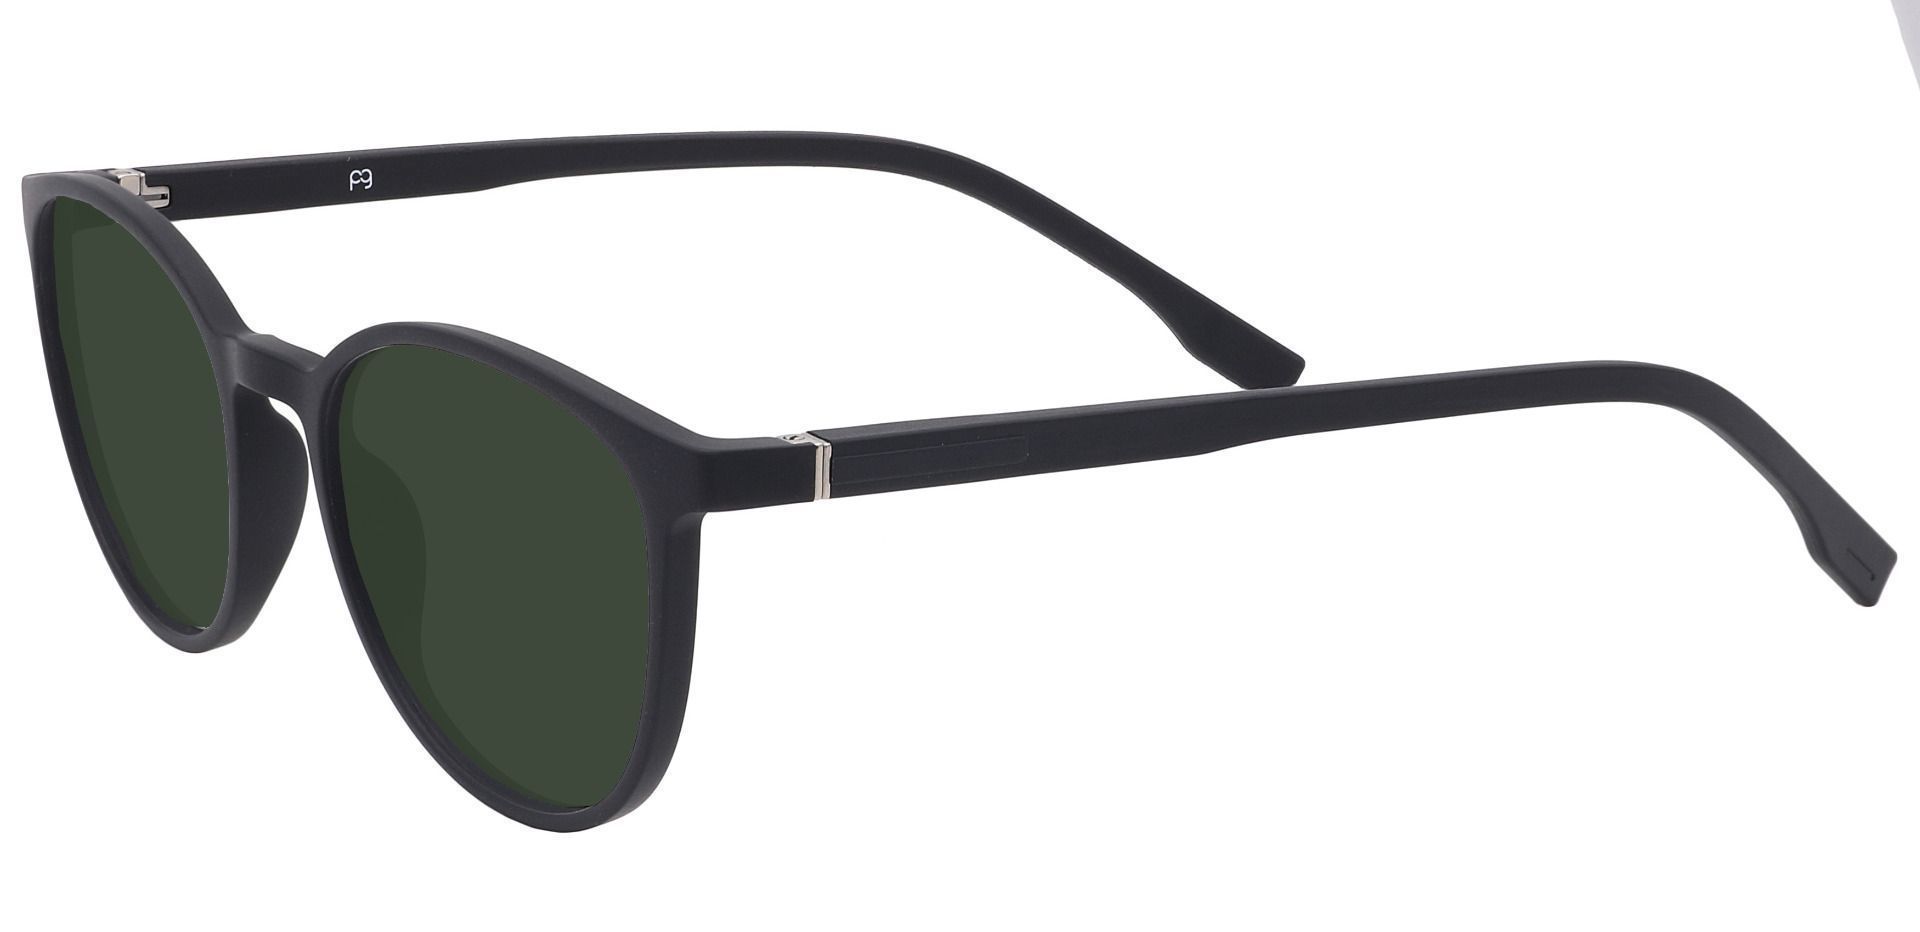 Bay Round Lined Bifocal Sunglasses - Black Frame With Green Lenses